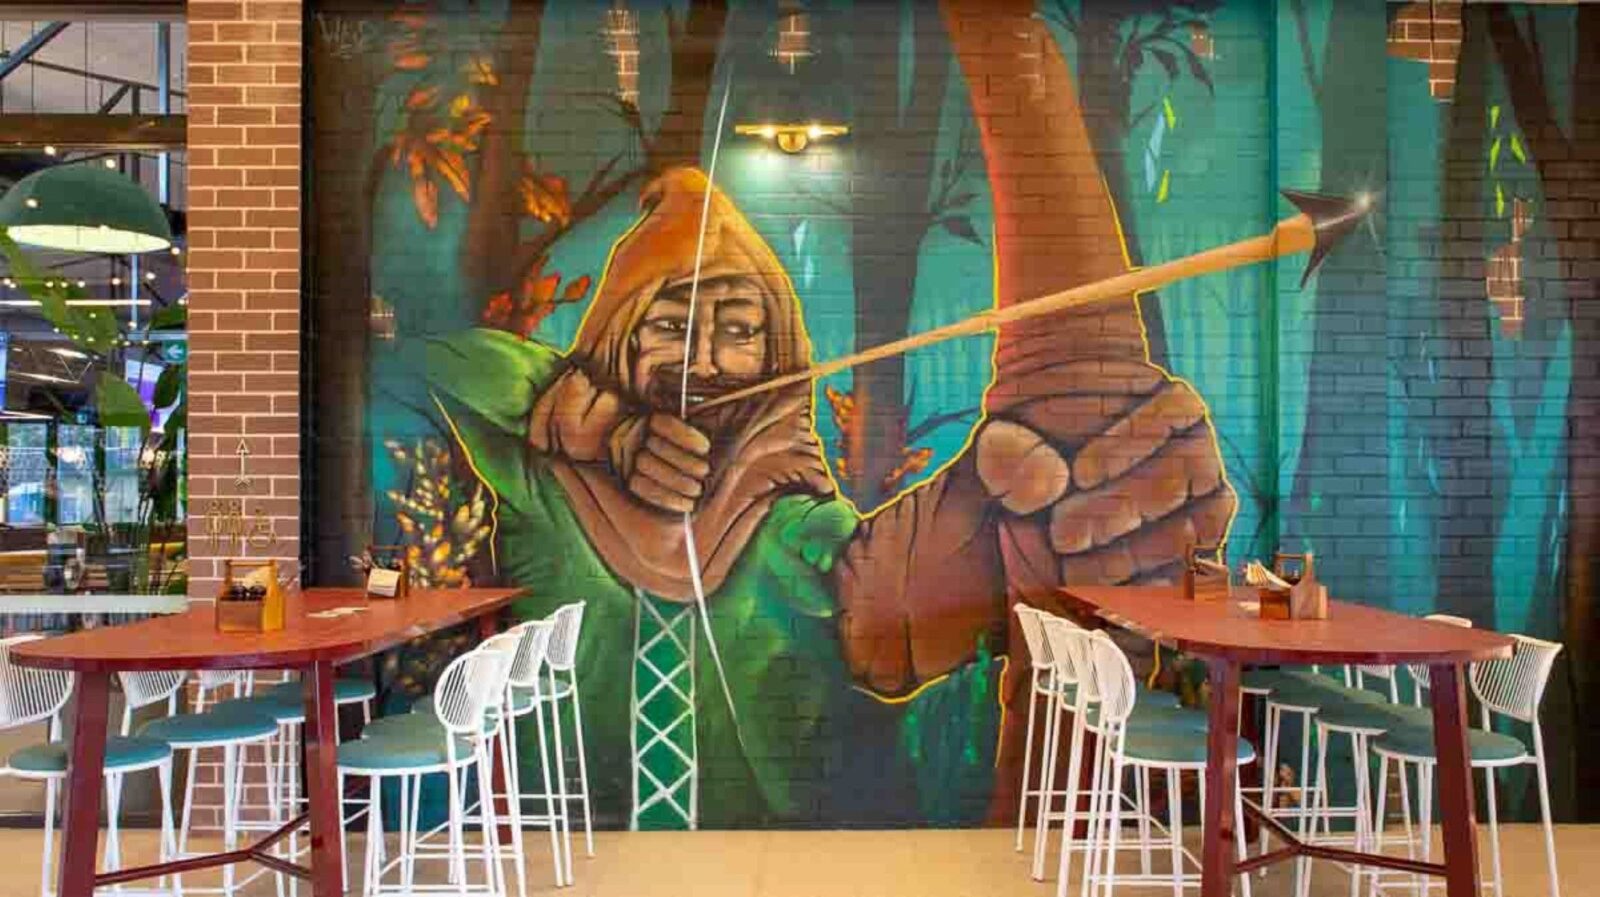 A Mural of Robin Hood A man in a cape with a bow and arrow